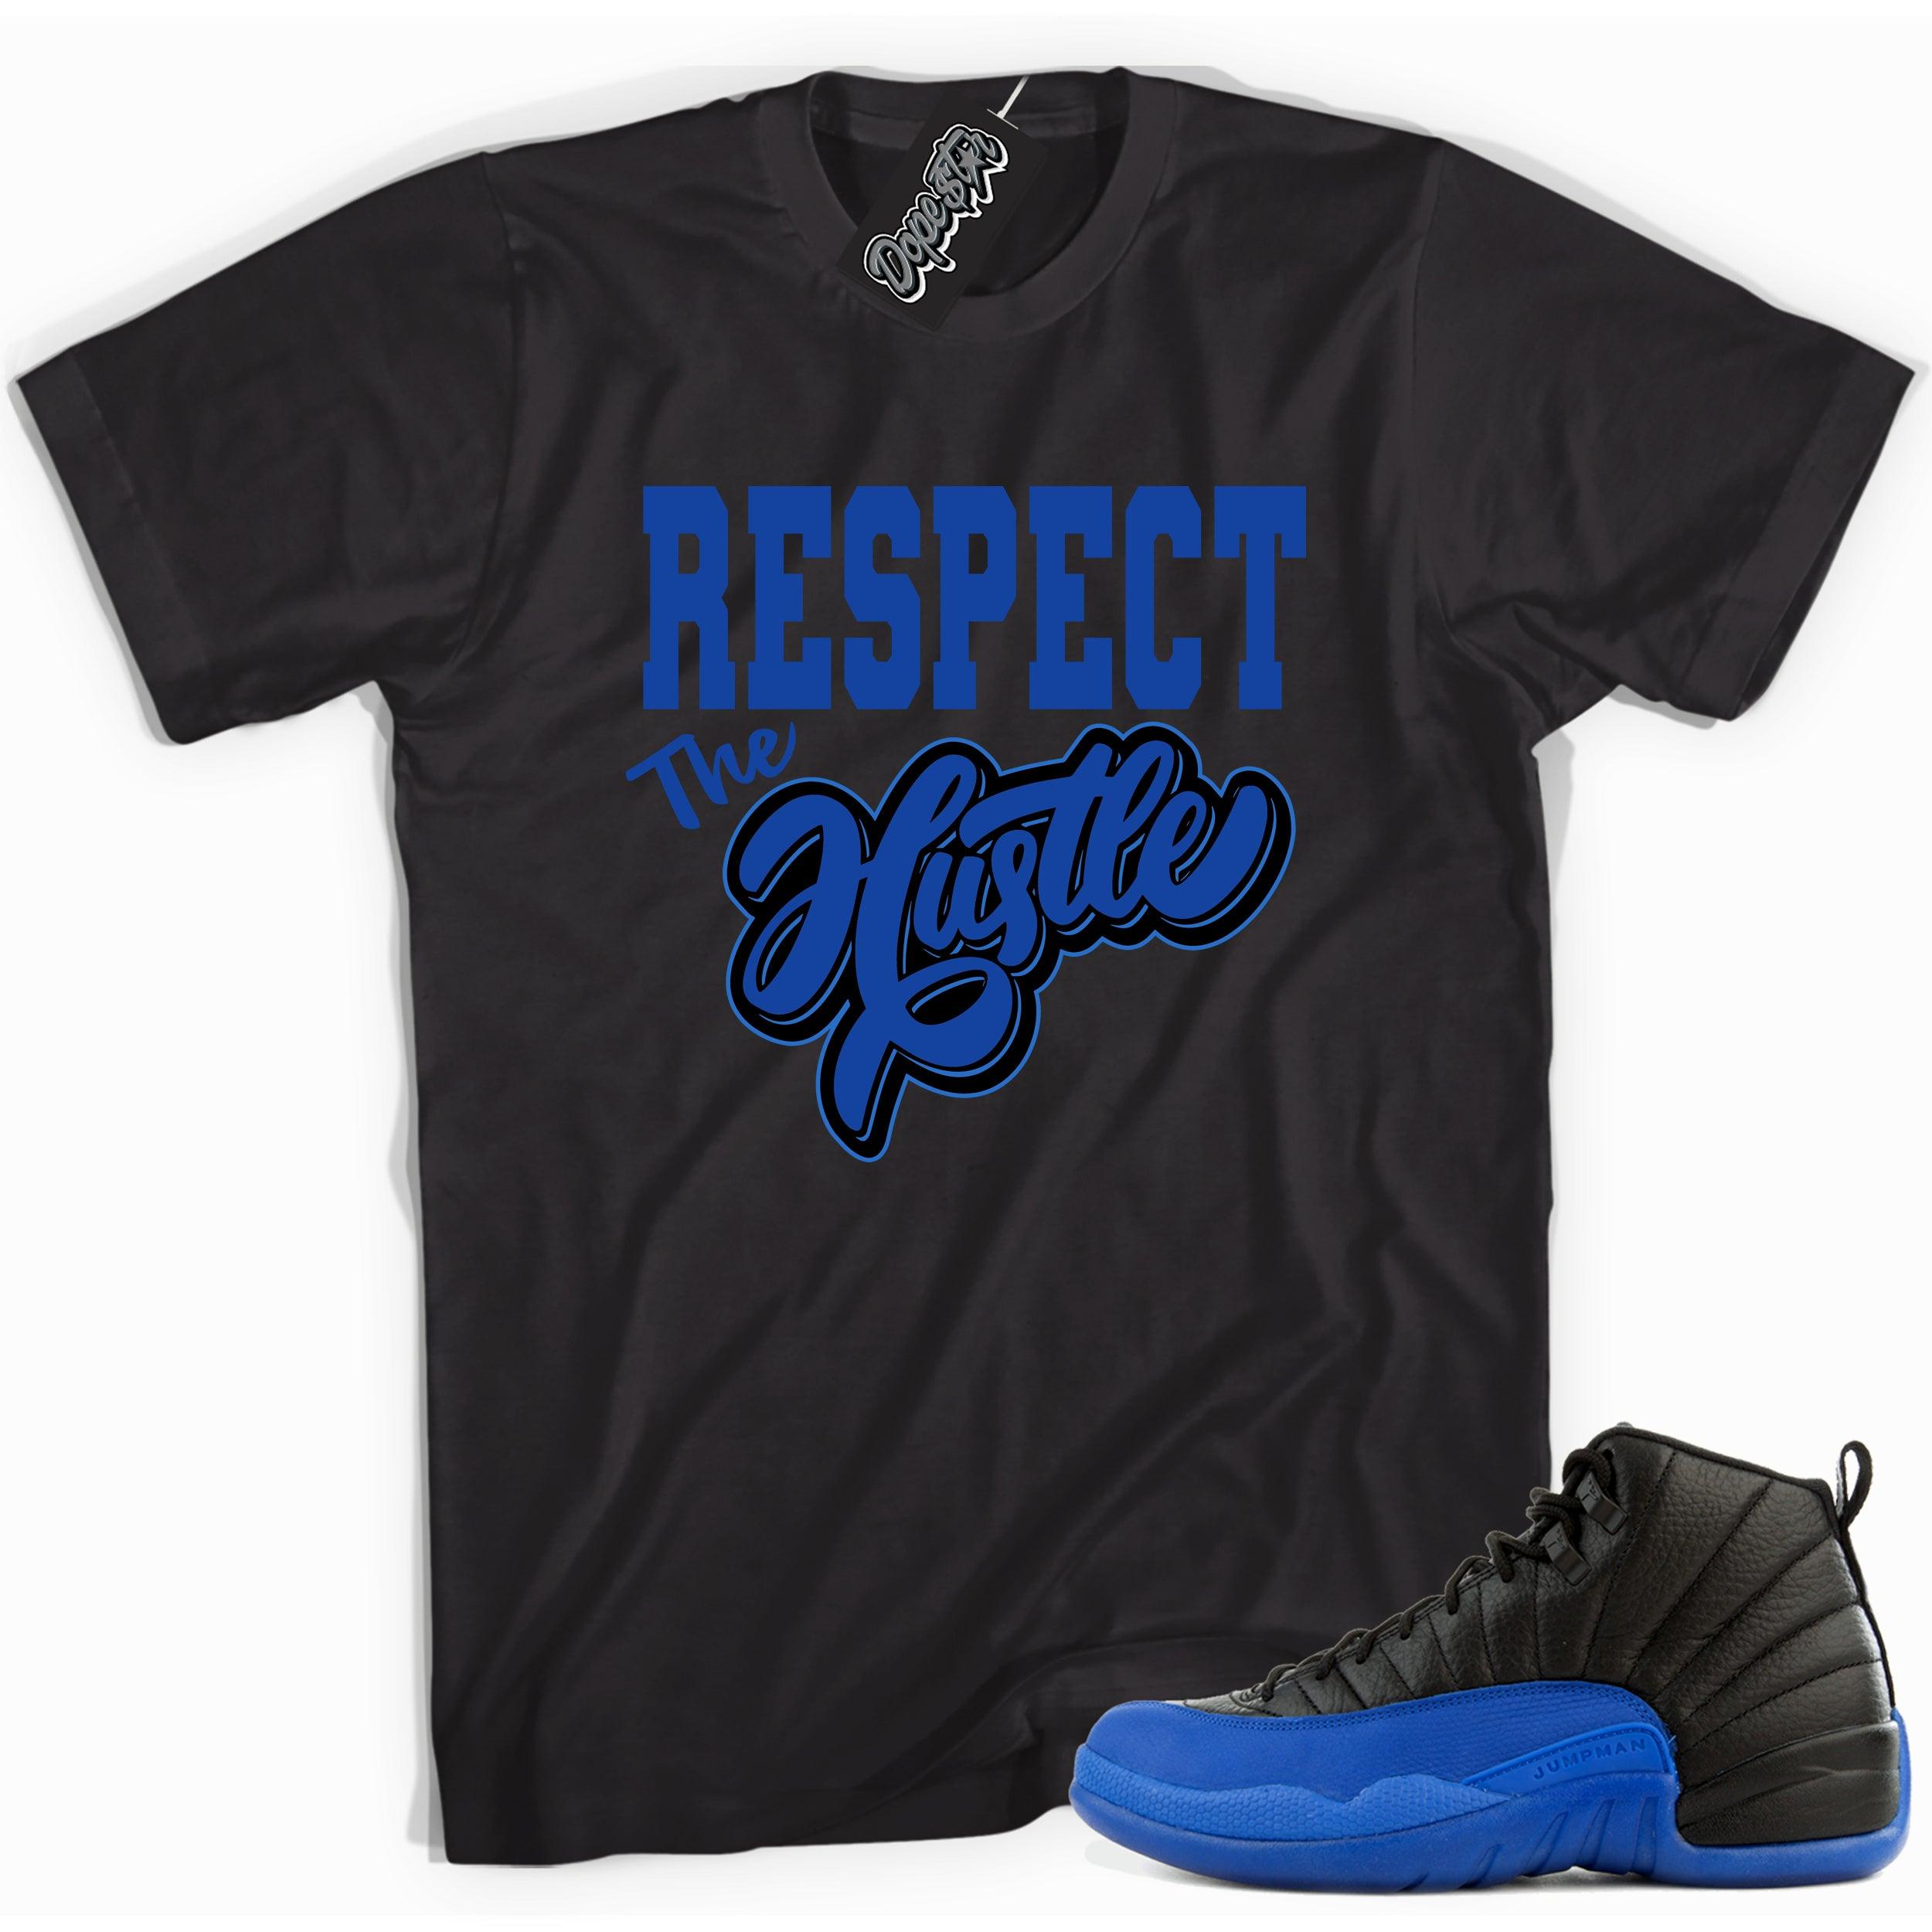 Cool black graphic tee with 'respect the hustle' print, that perfectly matches  Air Jordan 12 Retro Black Game Royal sneakers.